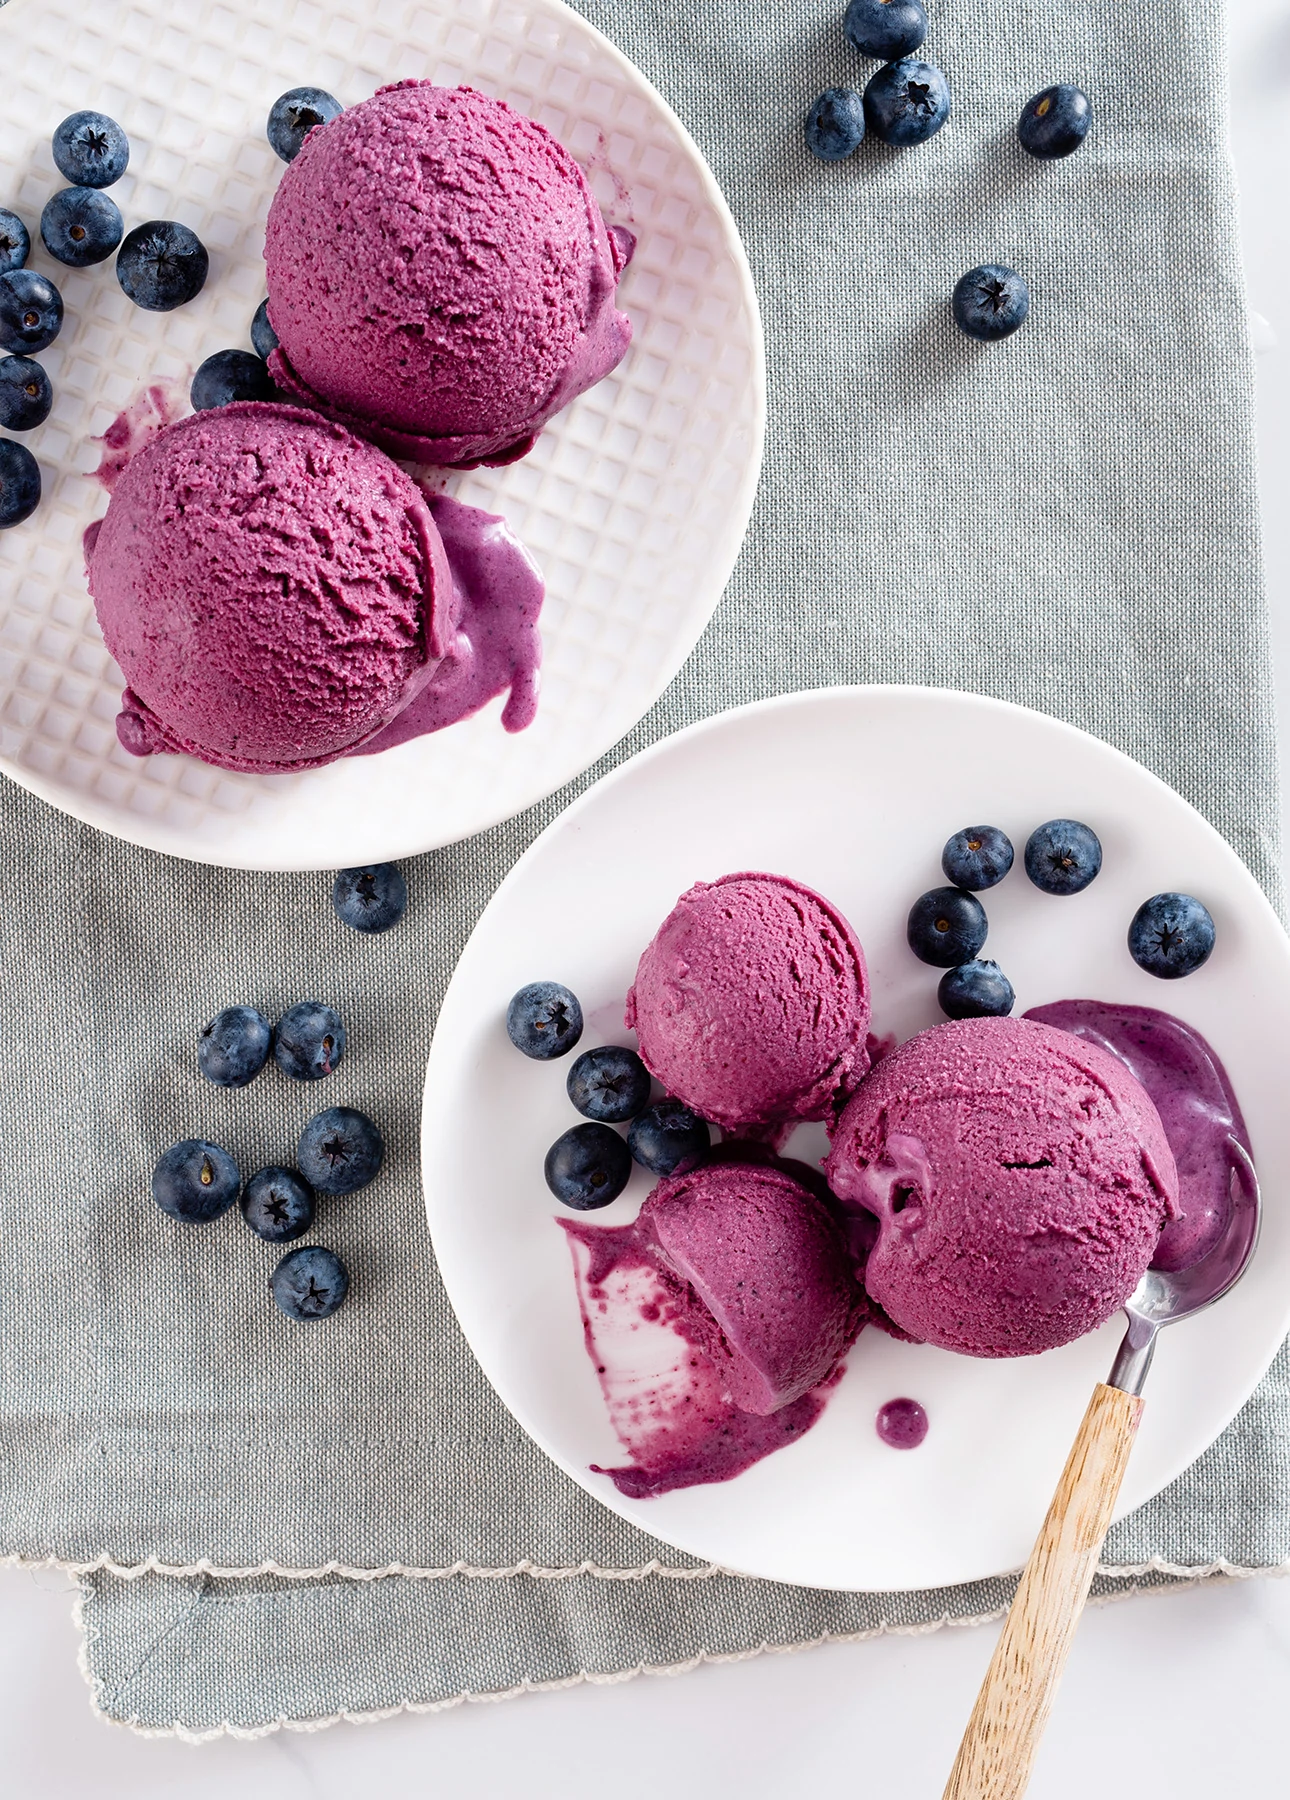 Blueberry Gelato, a flavor that works especially well when made with a vegan gelato base // FoodNouveau.com